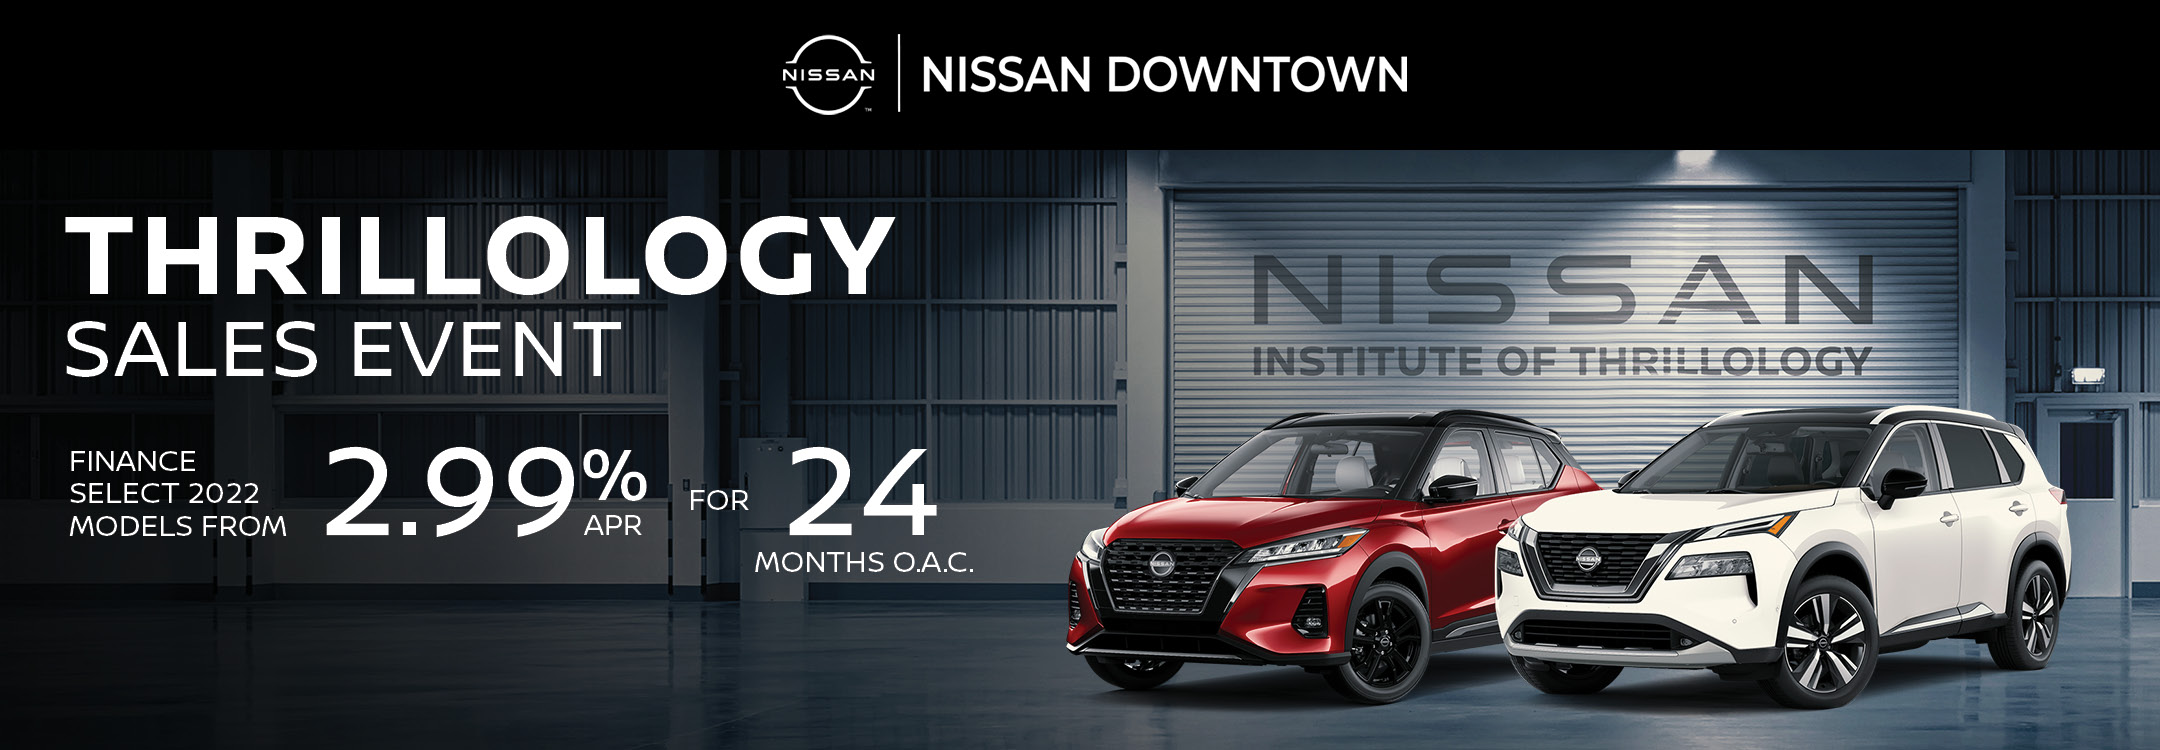 Thrillology Sales Event | Nissan Downtown